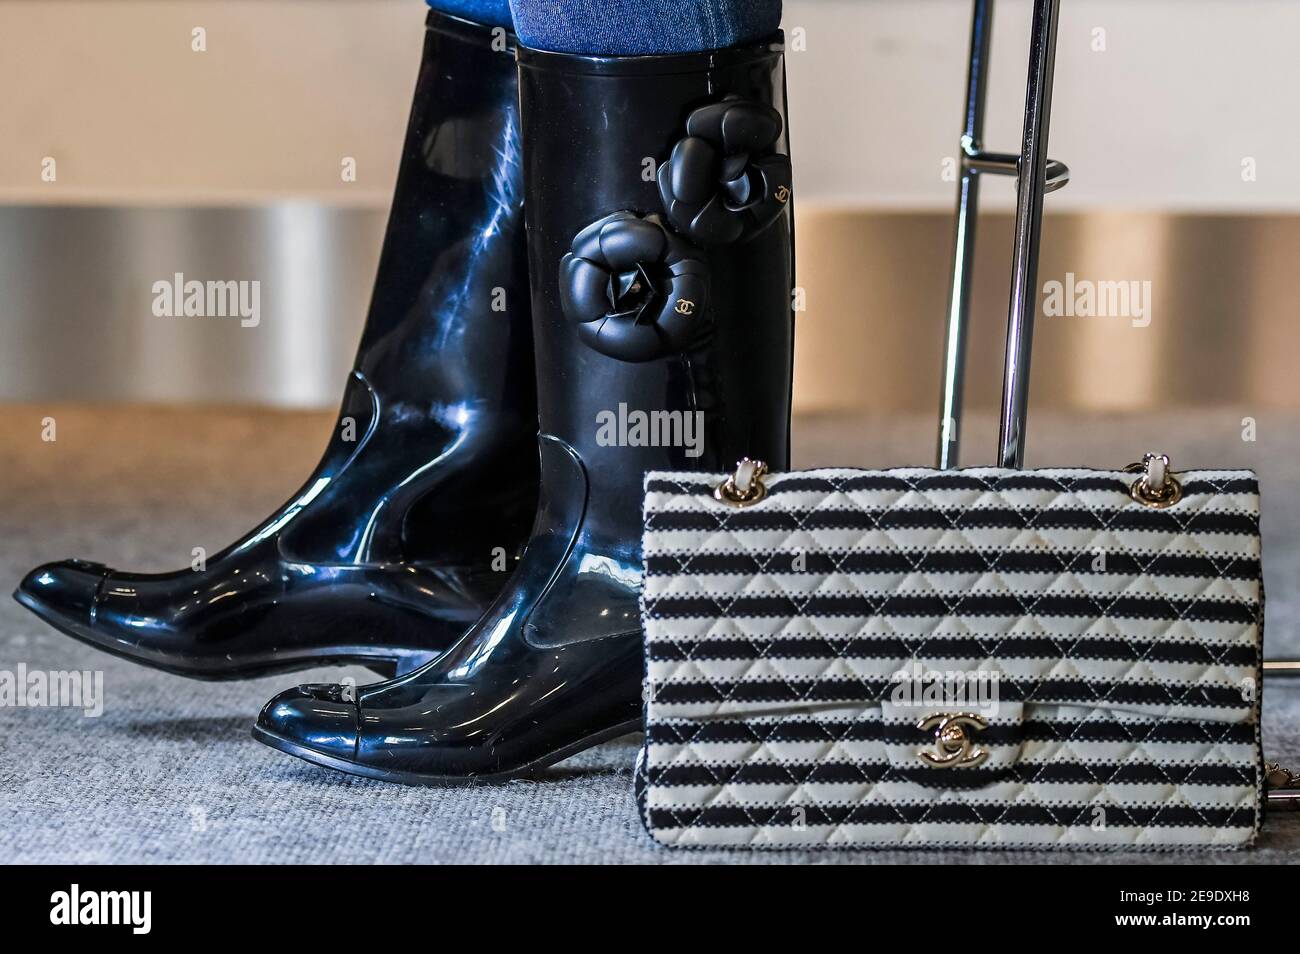 London, UK. 4 Feb 2021. Designer Wellington Boots by Chanel with Camellia  design (part of a set of 2 pairs) est £200-300 with a Black and White Coco  Sailor Flap Bag, Cruise